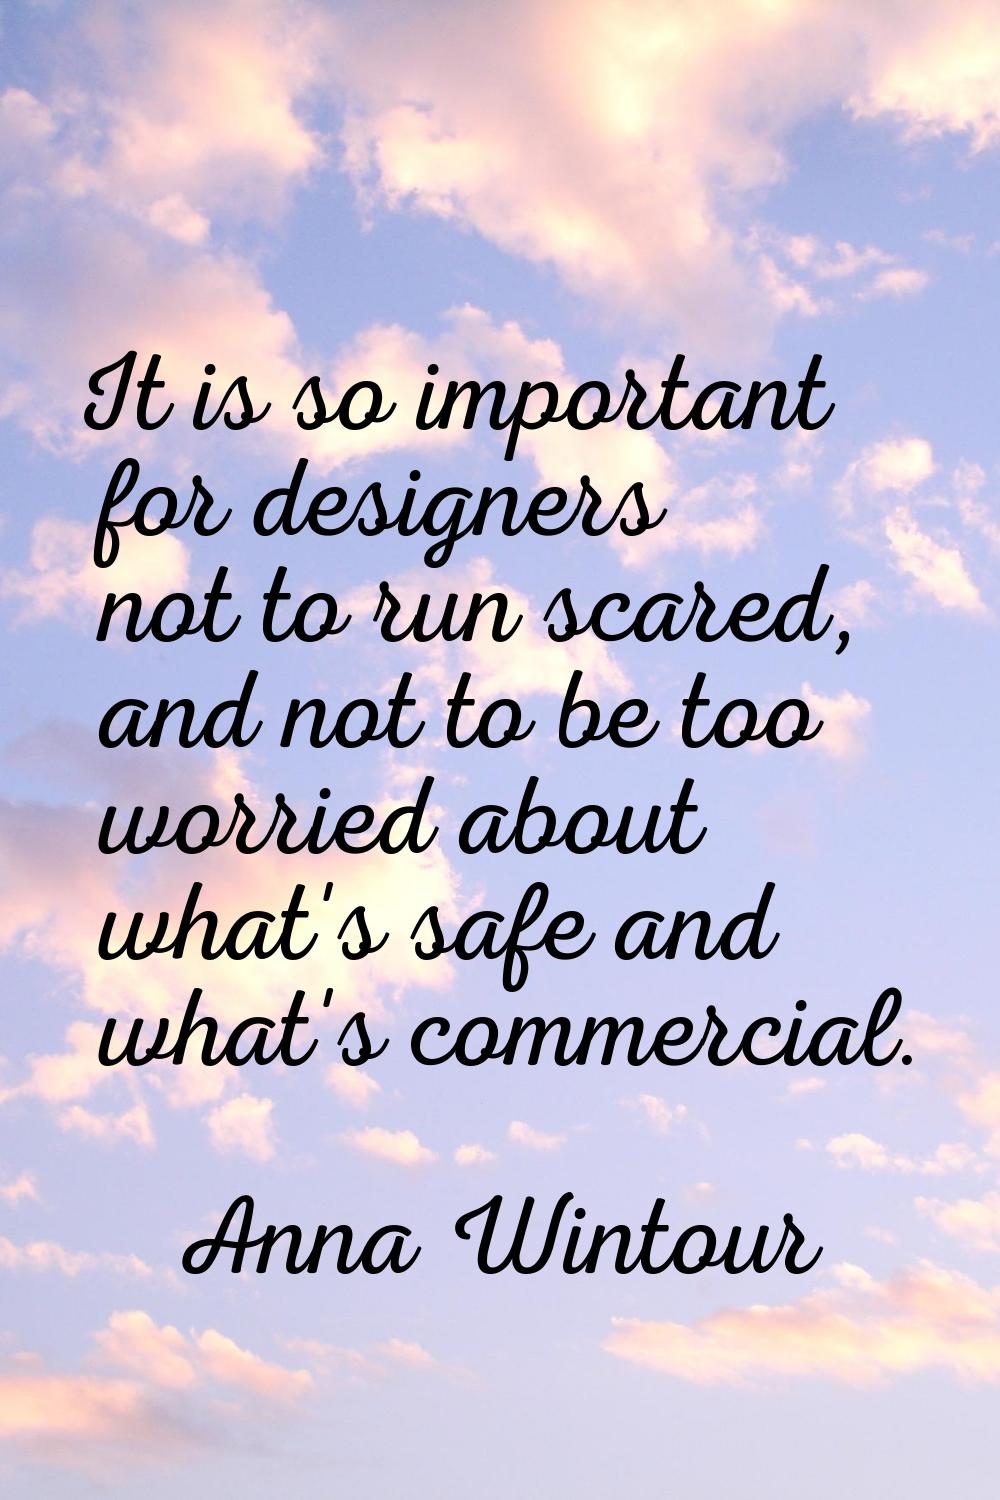 It is so important for designers not to run scared, and not to be too worried about what's safe and